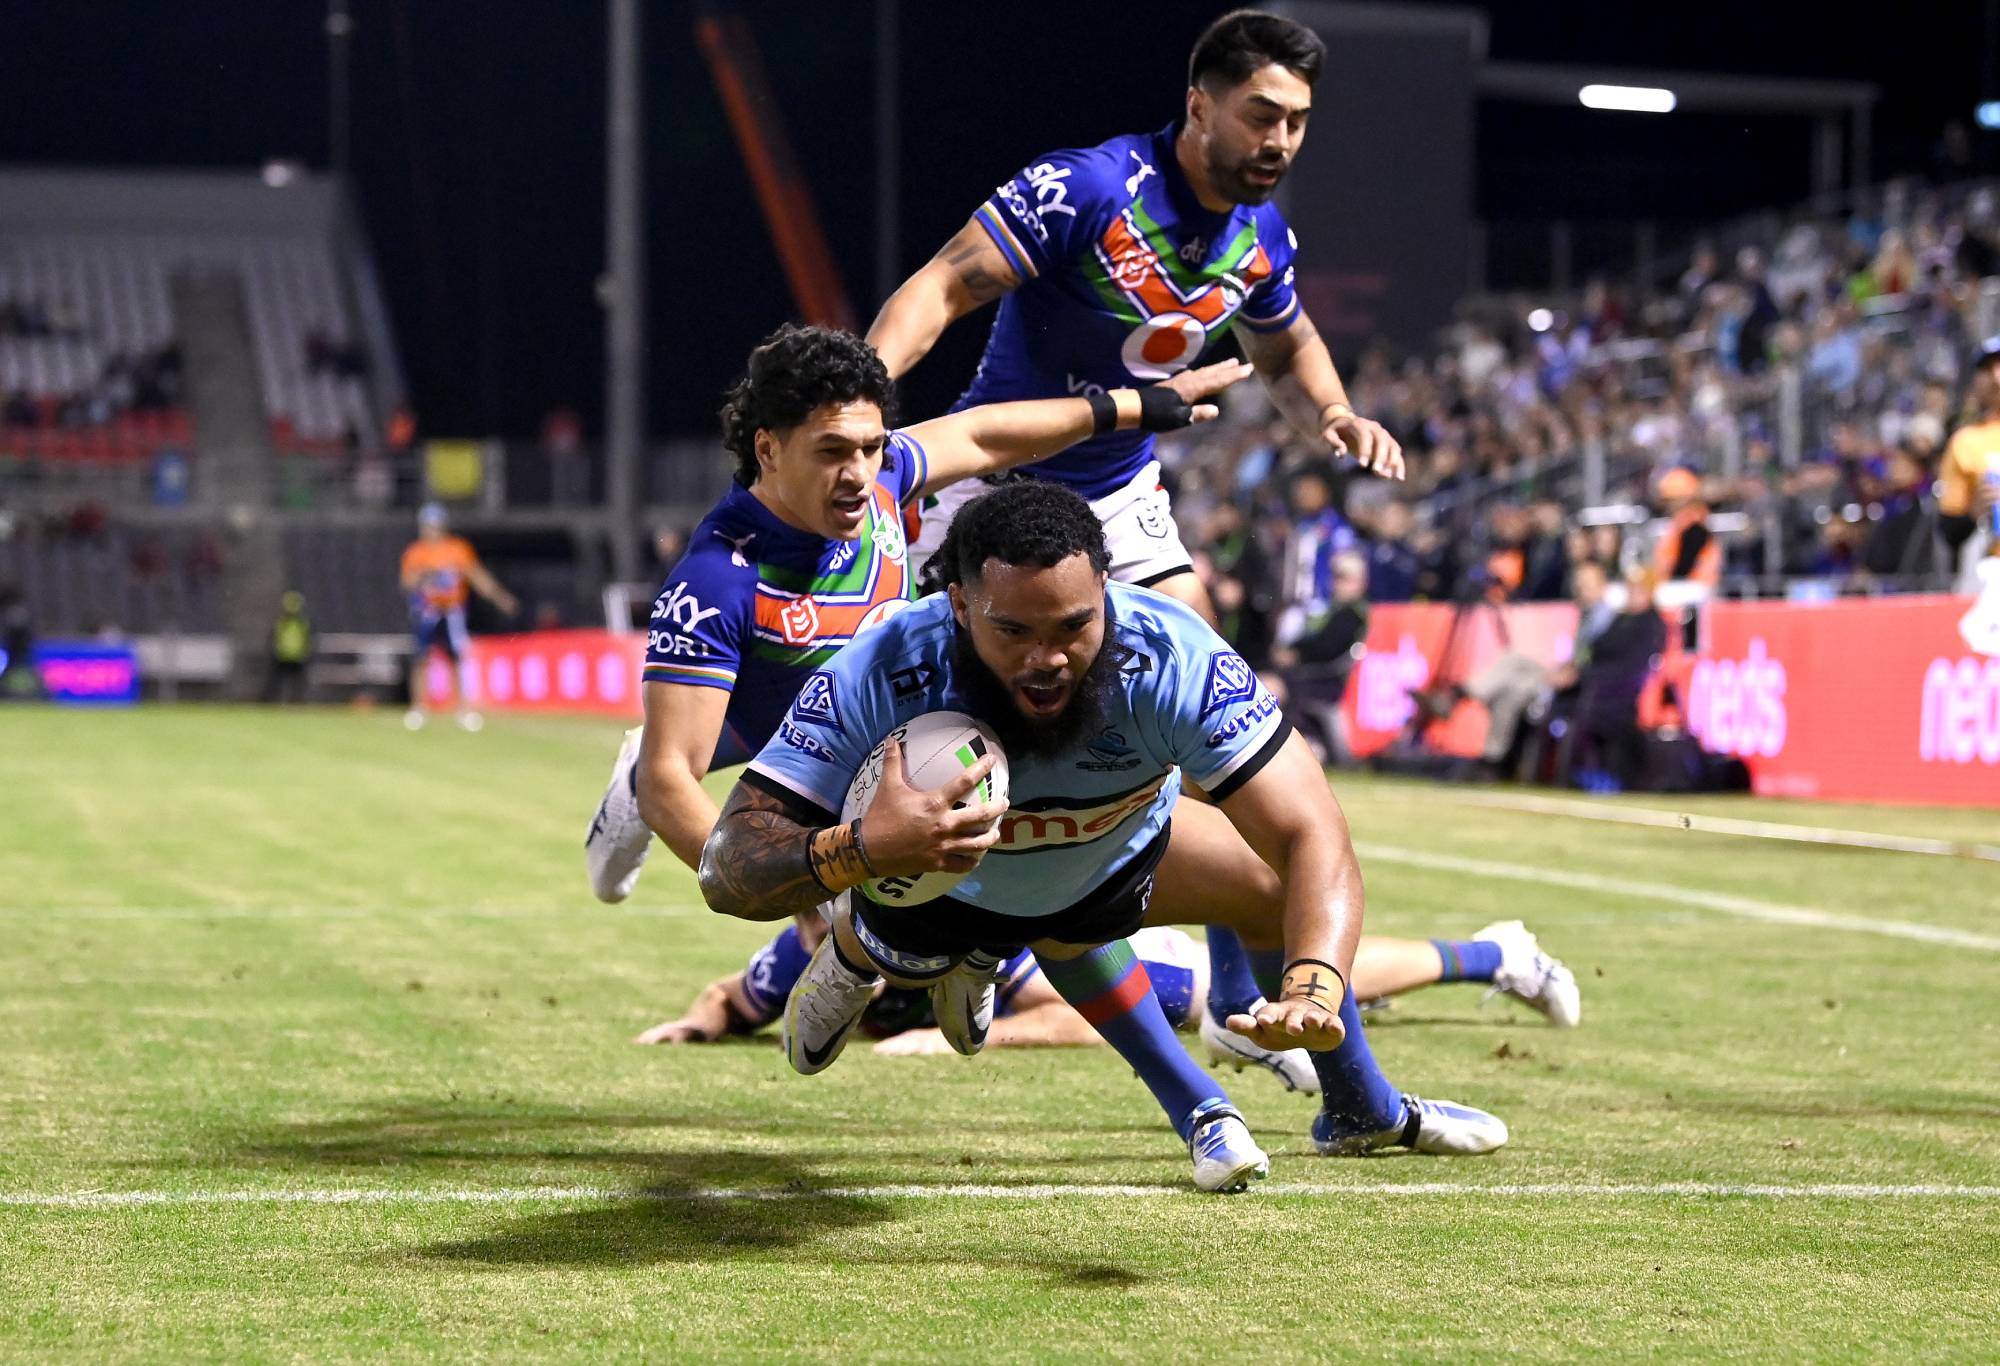 BRISBANE, AUSTRALIA - JUNE 12: Siosifa Talakai of the Sharks scores a try during the round 14 NRL match between the New Zealand Warriors and the Cronulla Sharks at Moreton Daily Stadium, on June 12, 2022, in Brisbane, Australia. (Photo by Bradley Kanaris/Getty Images)